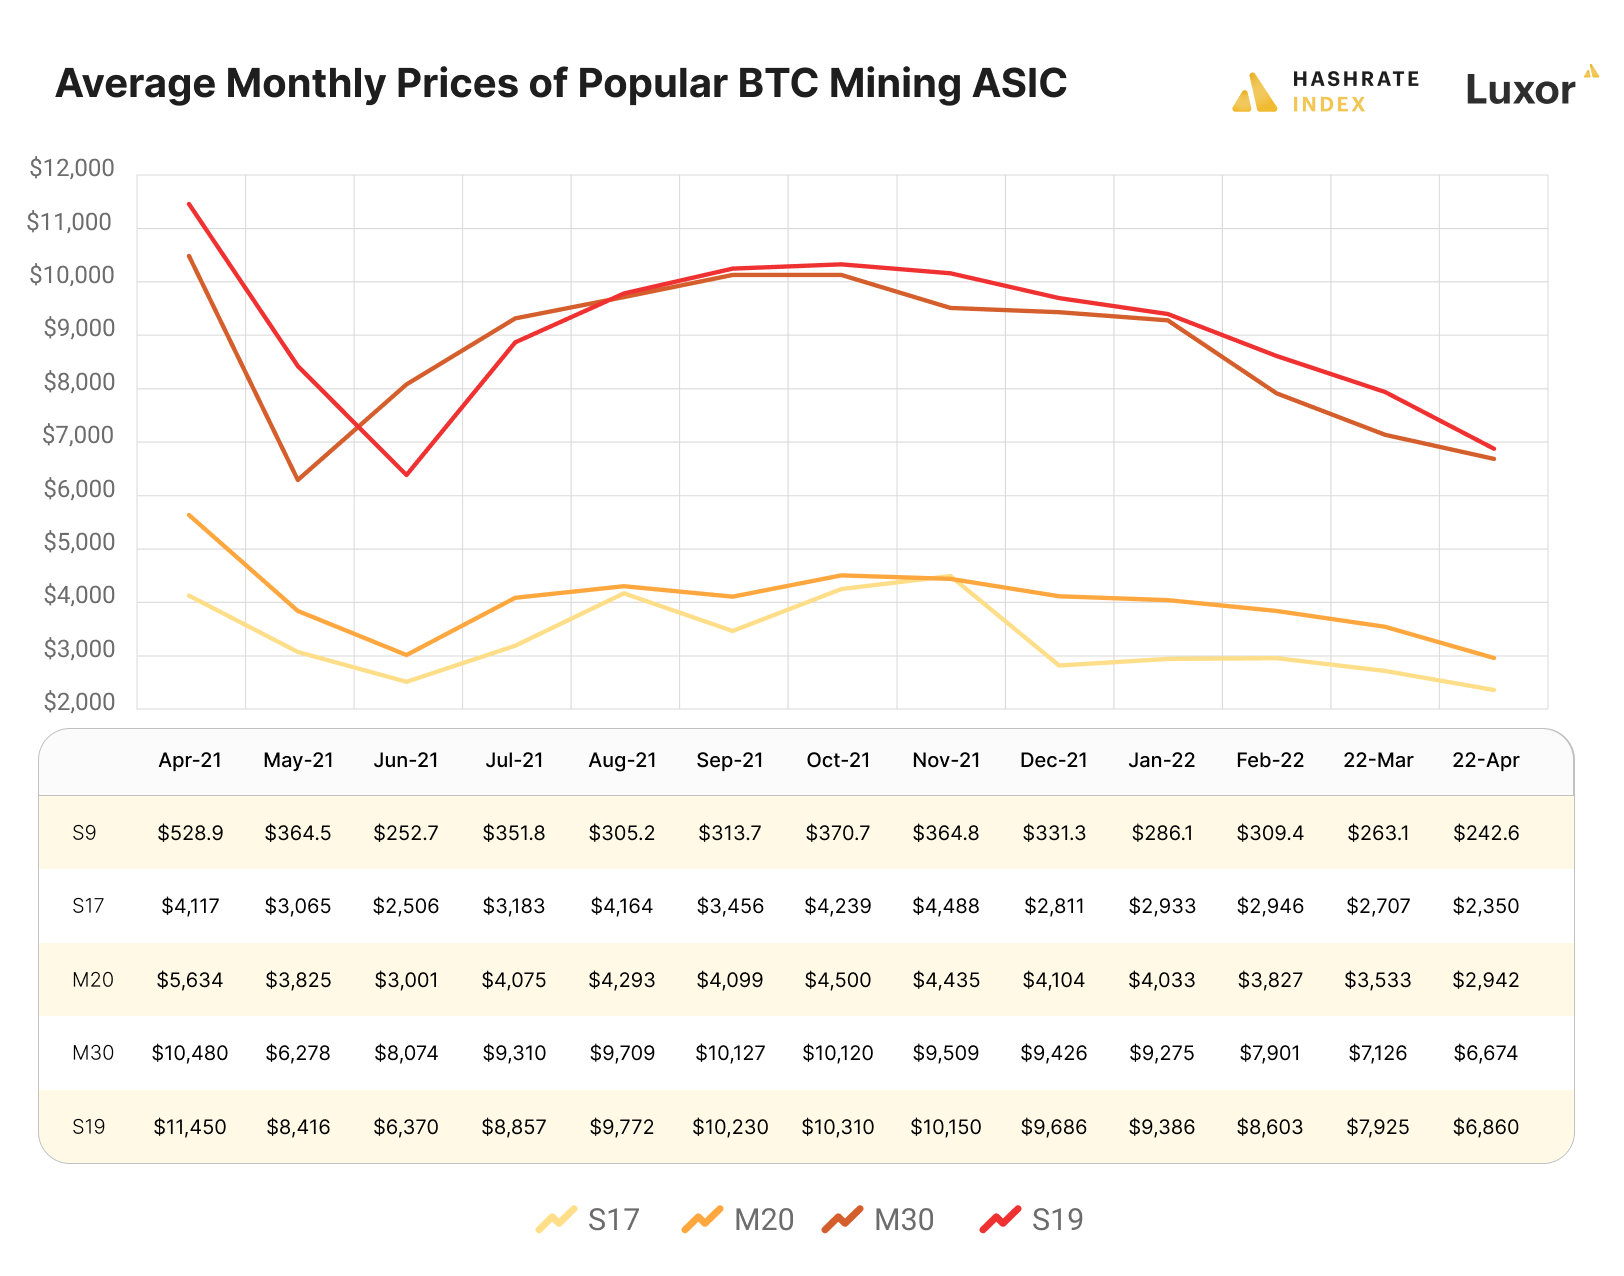 Bitcoin mining ASIC prices by model | Source: Hashrate Index ASIC Price Index